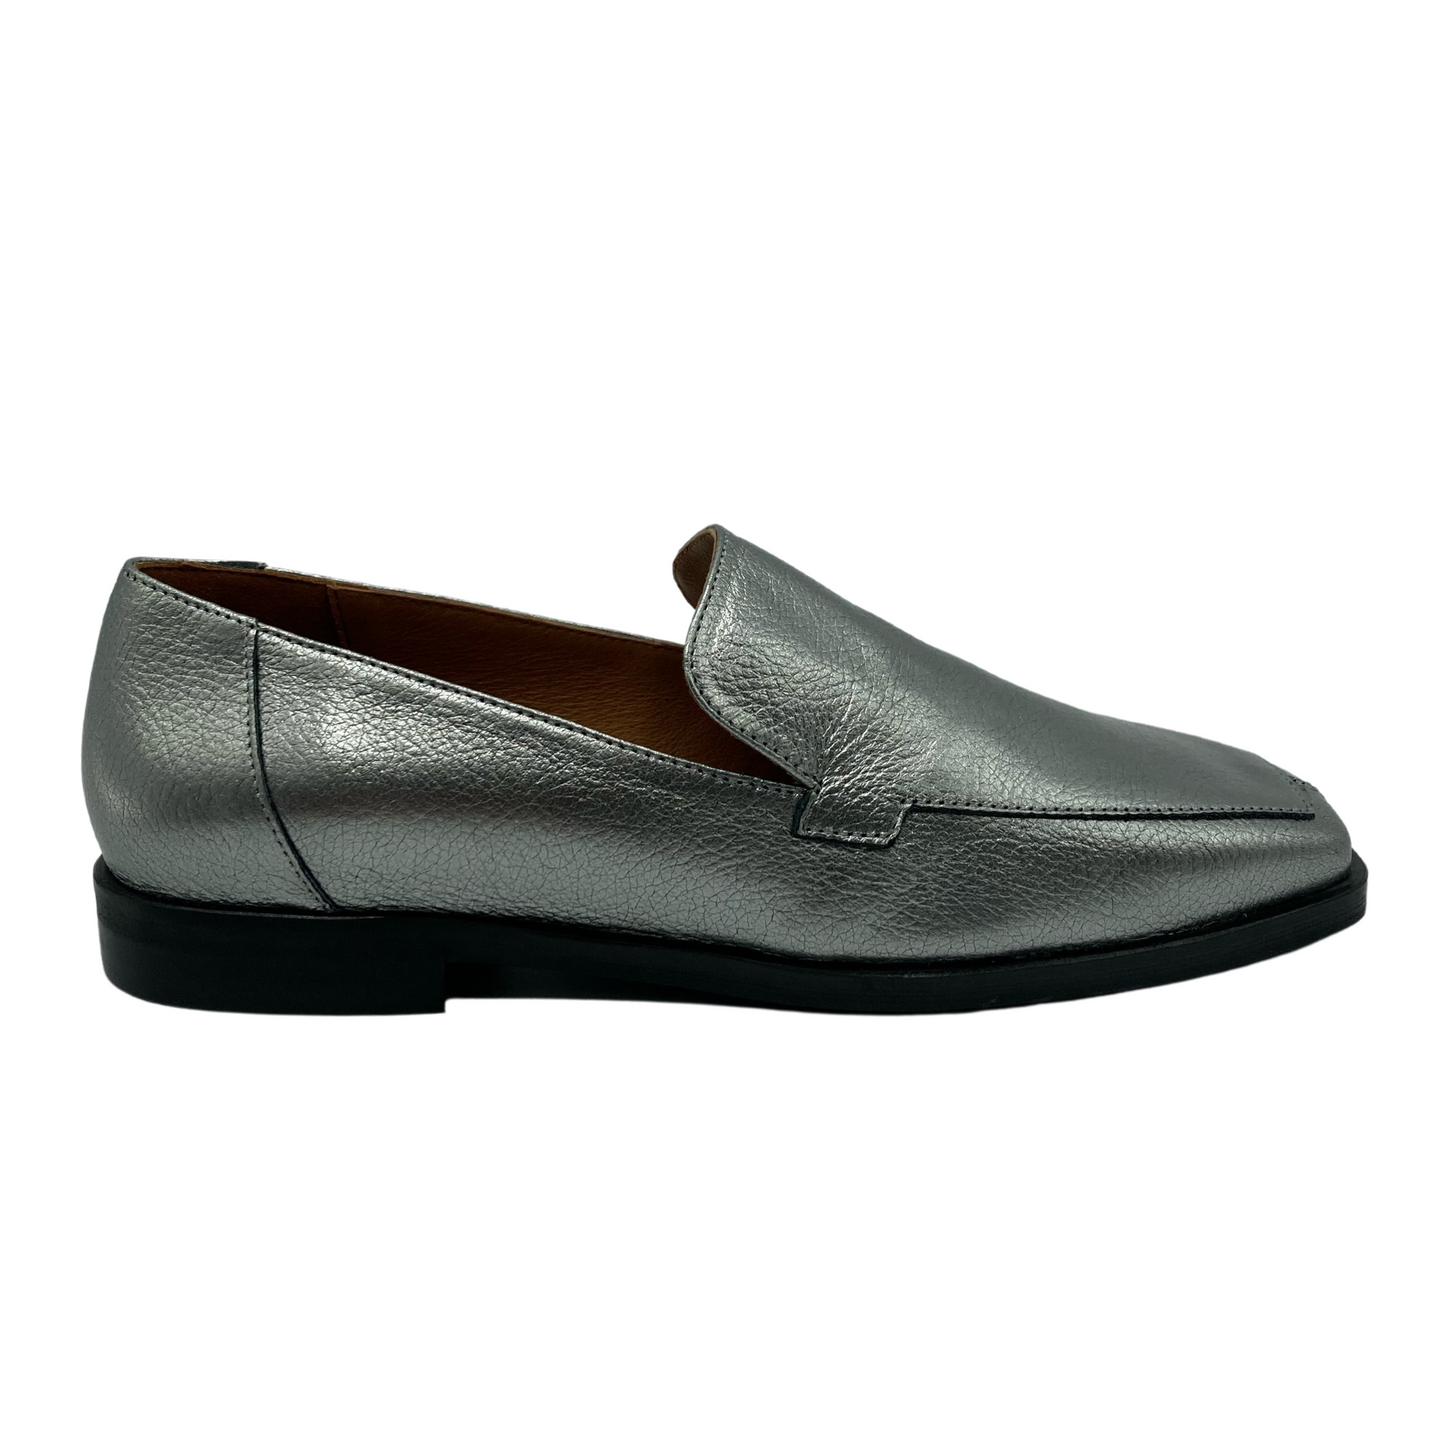 Right facing view of silver leather loafer with black outsole and leather lining